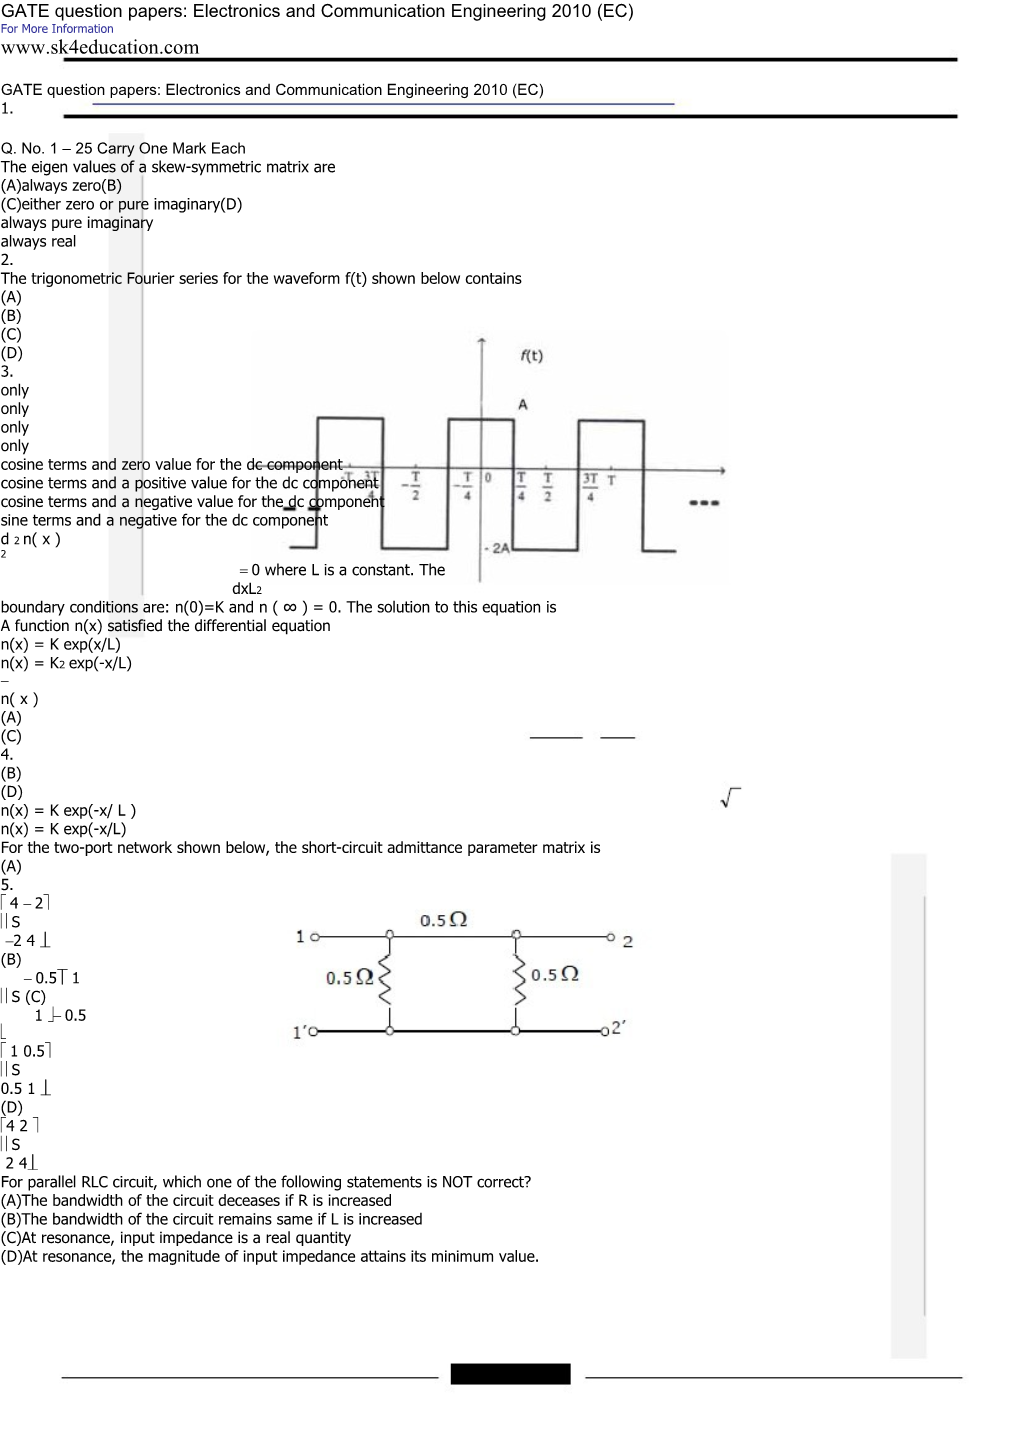 GATE Question Papers: Electronics and Communication Engineering 2010 (EC)